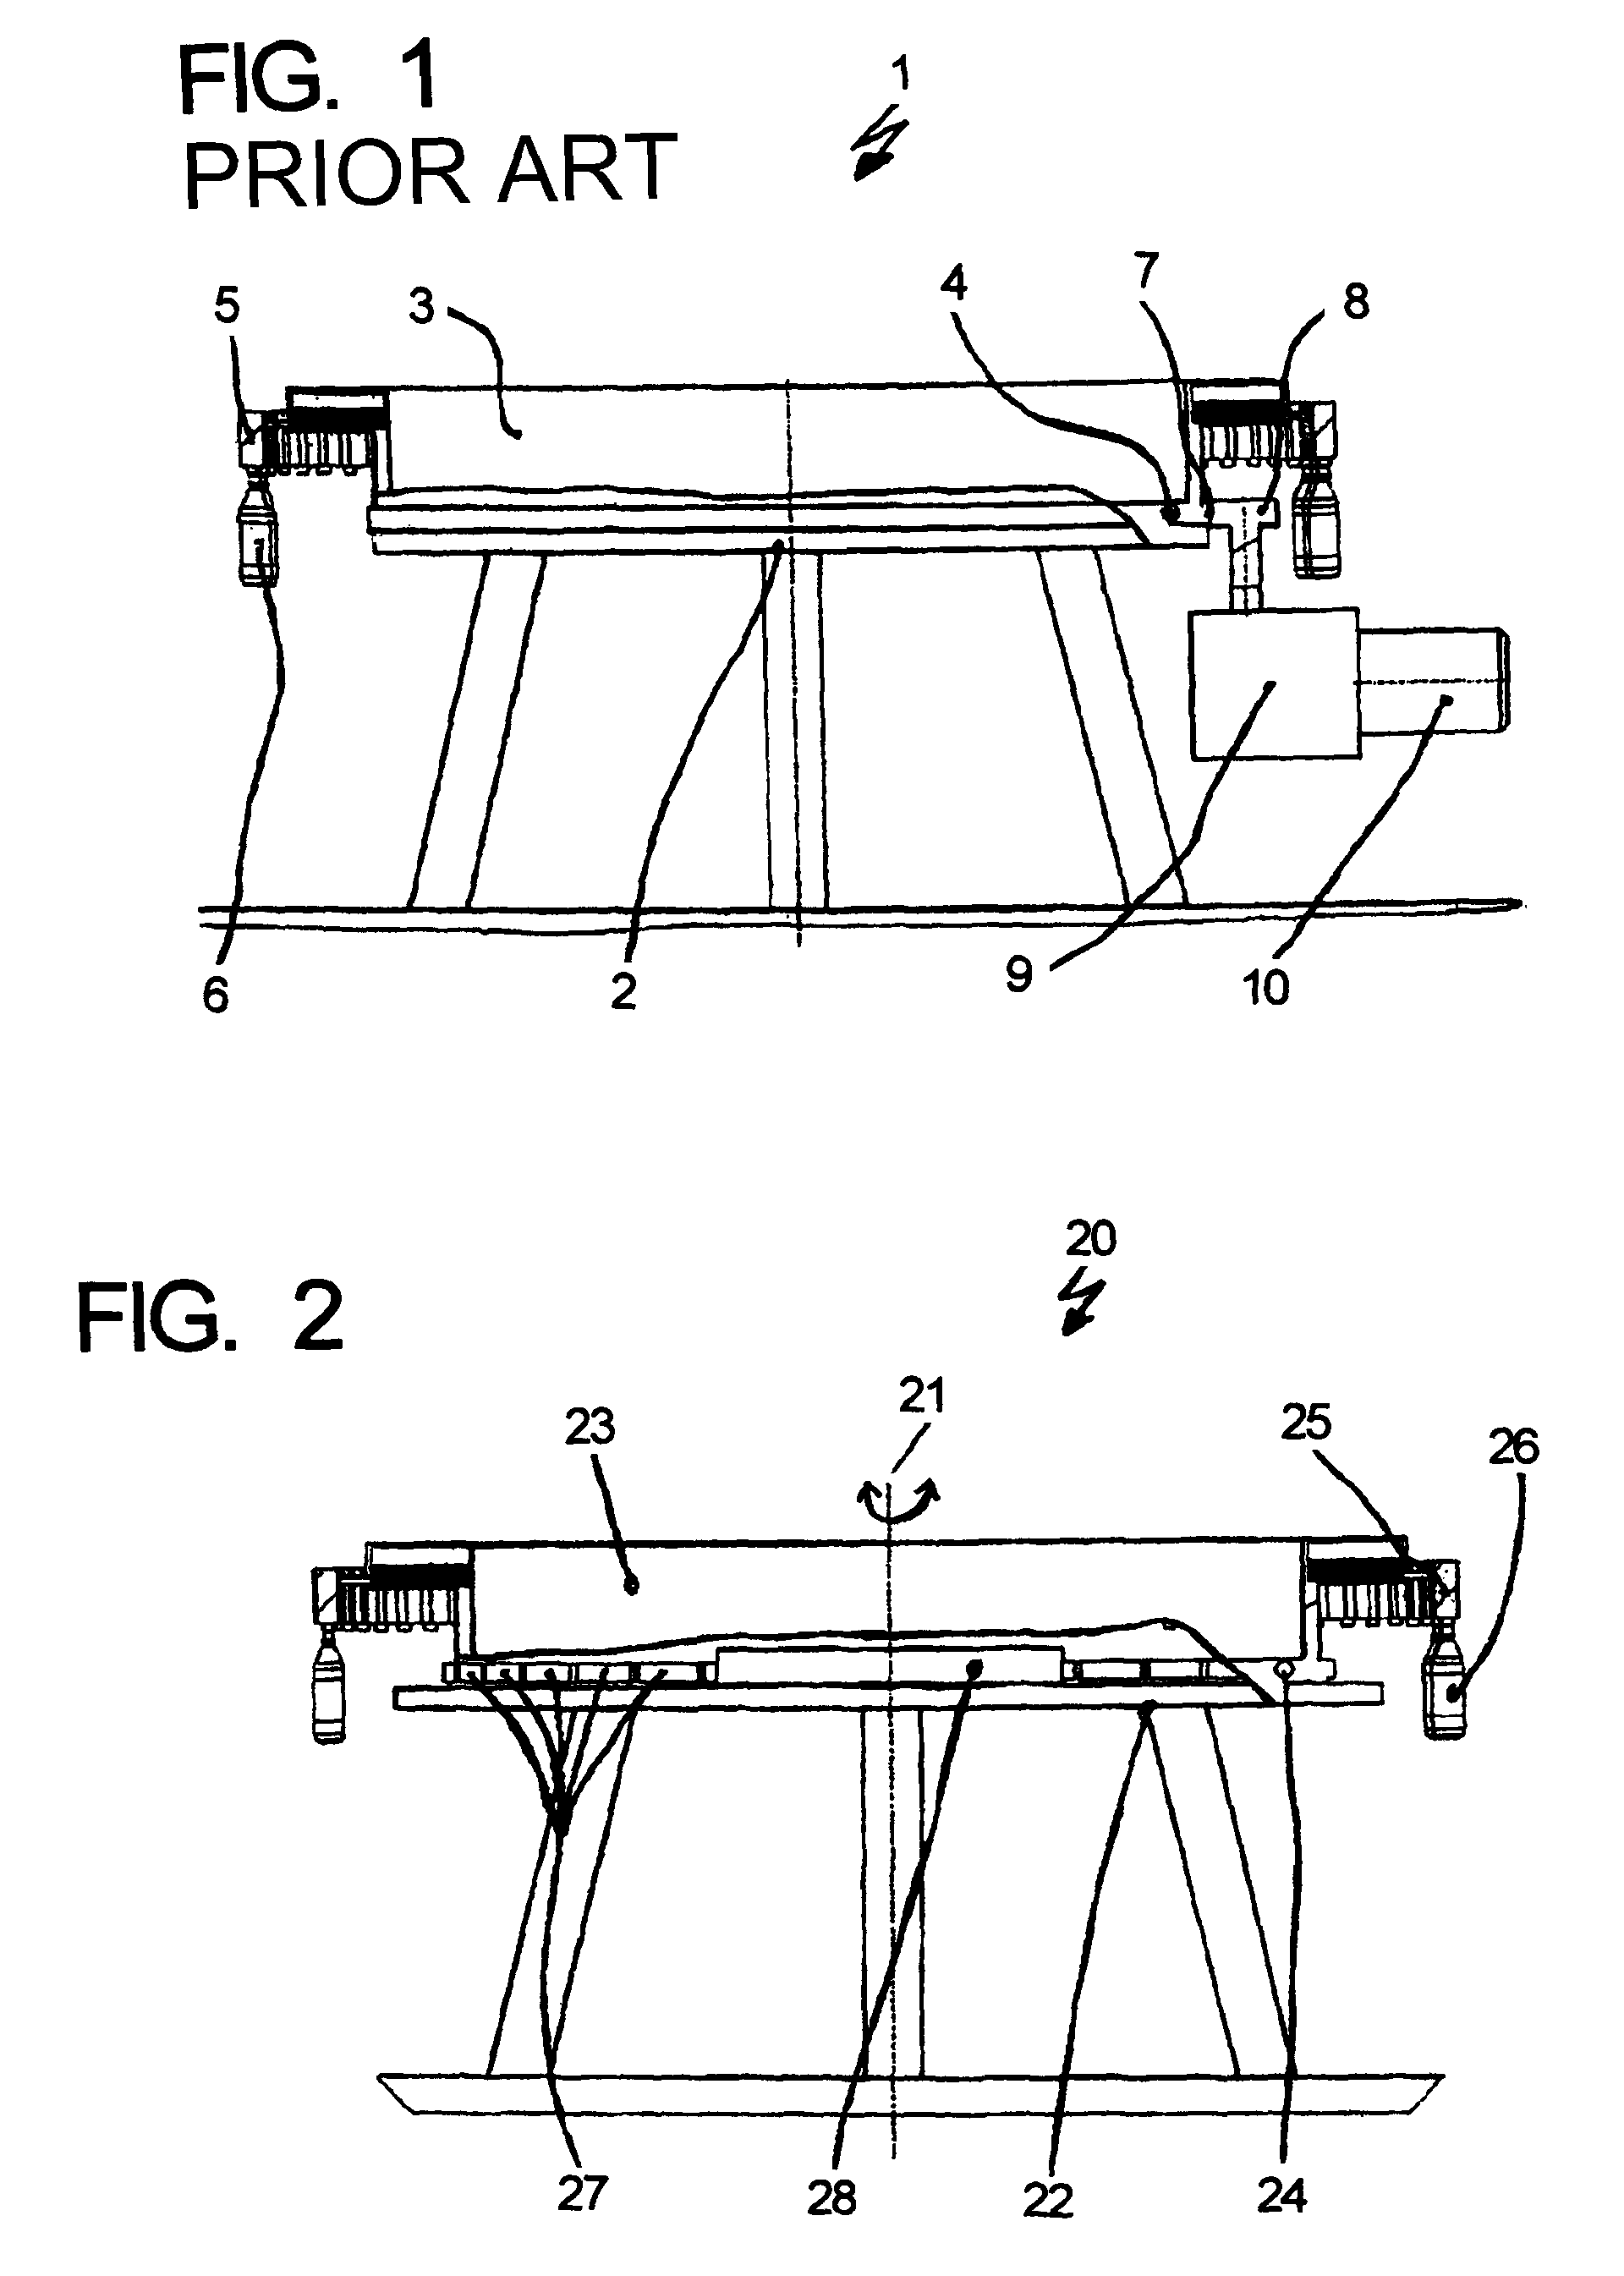 Bottling or container filling machine and other rotary bottle or container handling machines in a bottling or container filling plant and a drive therefor